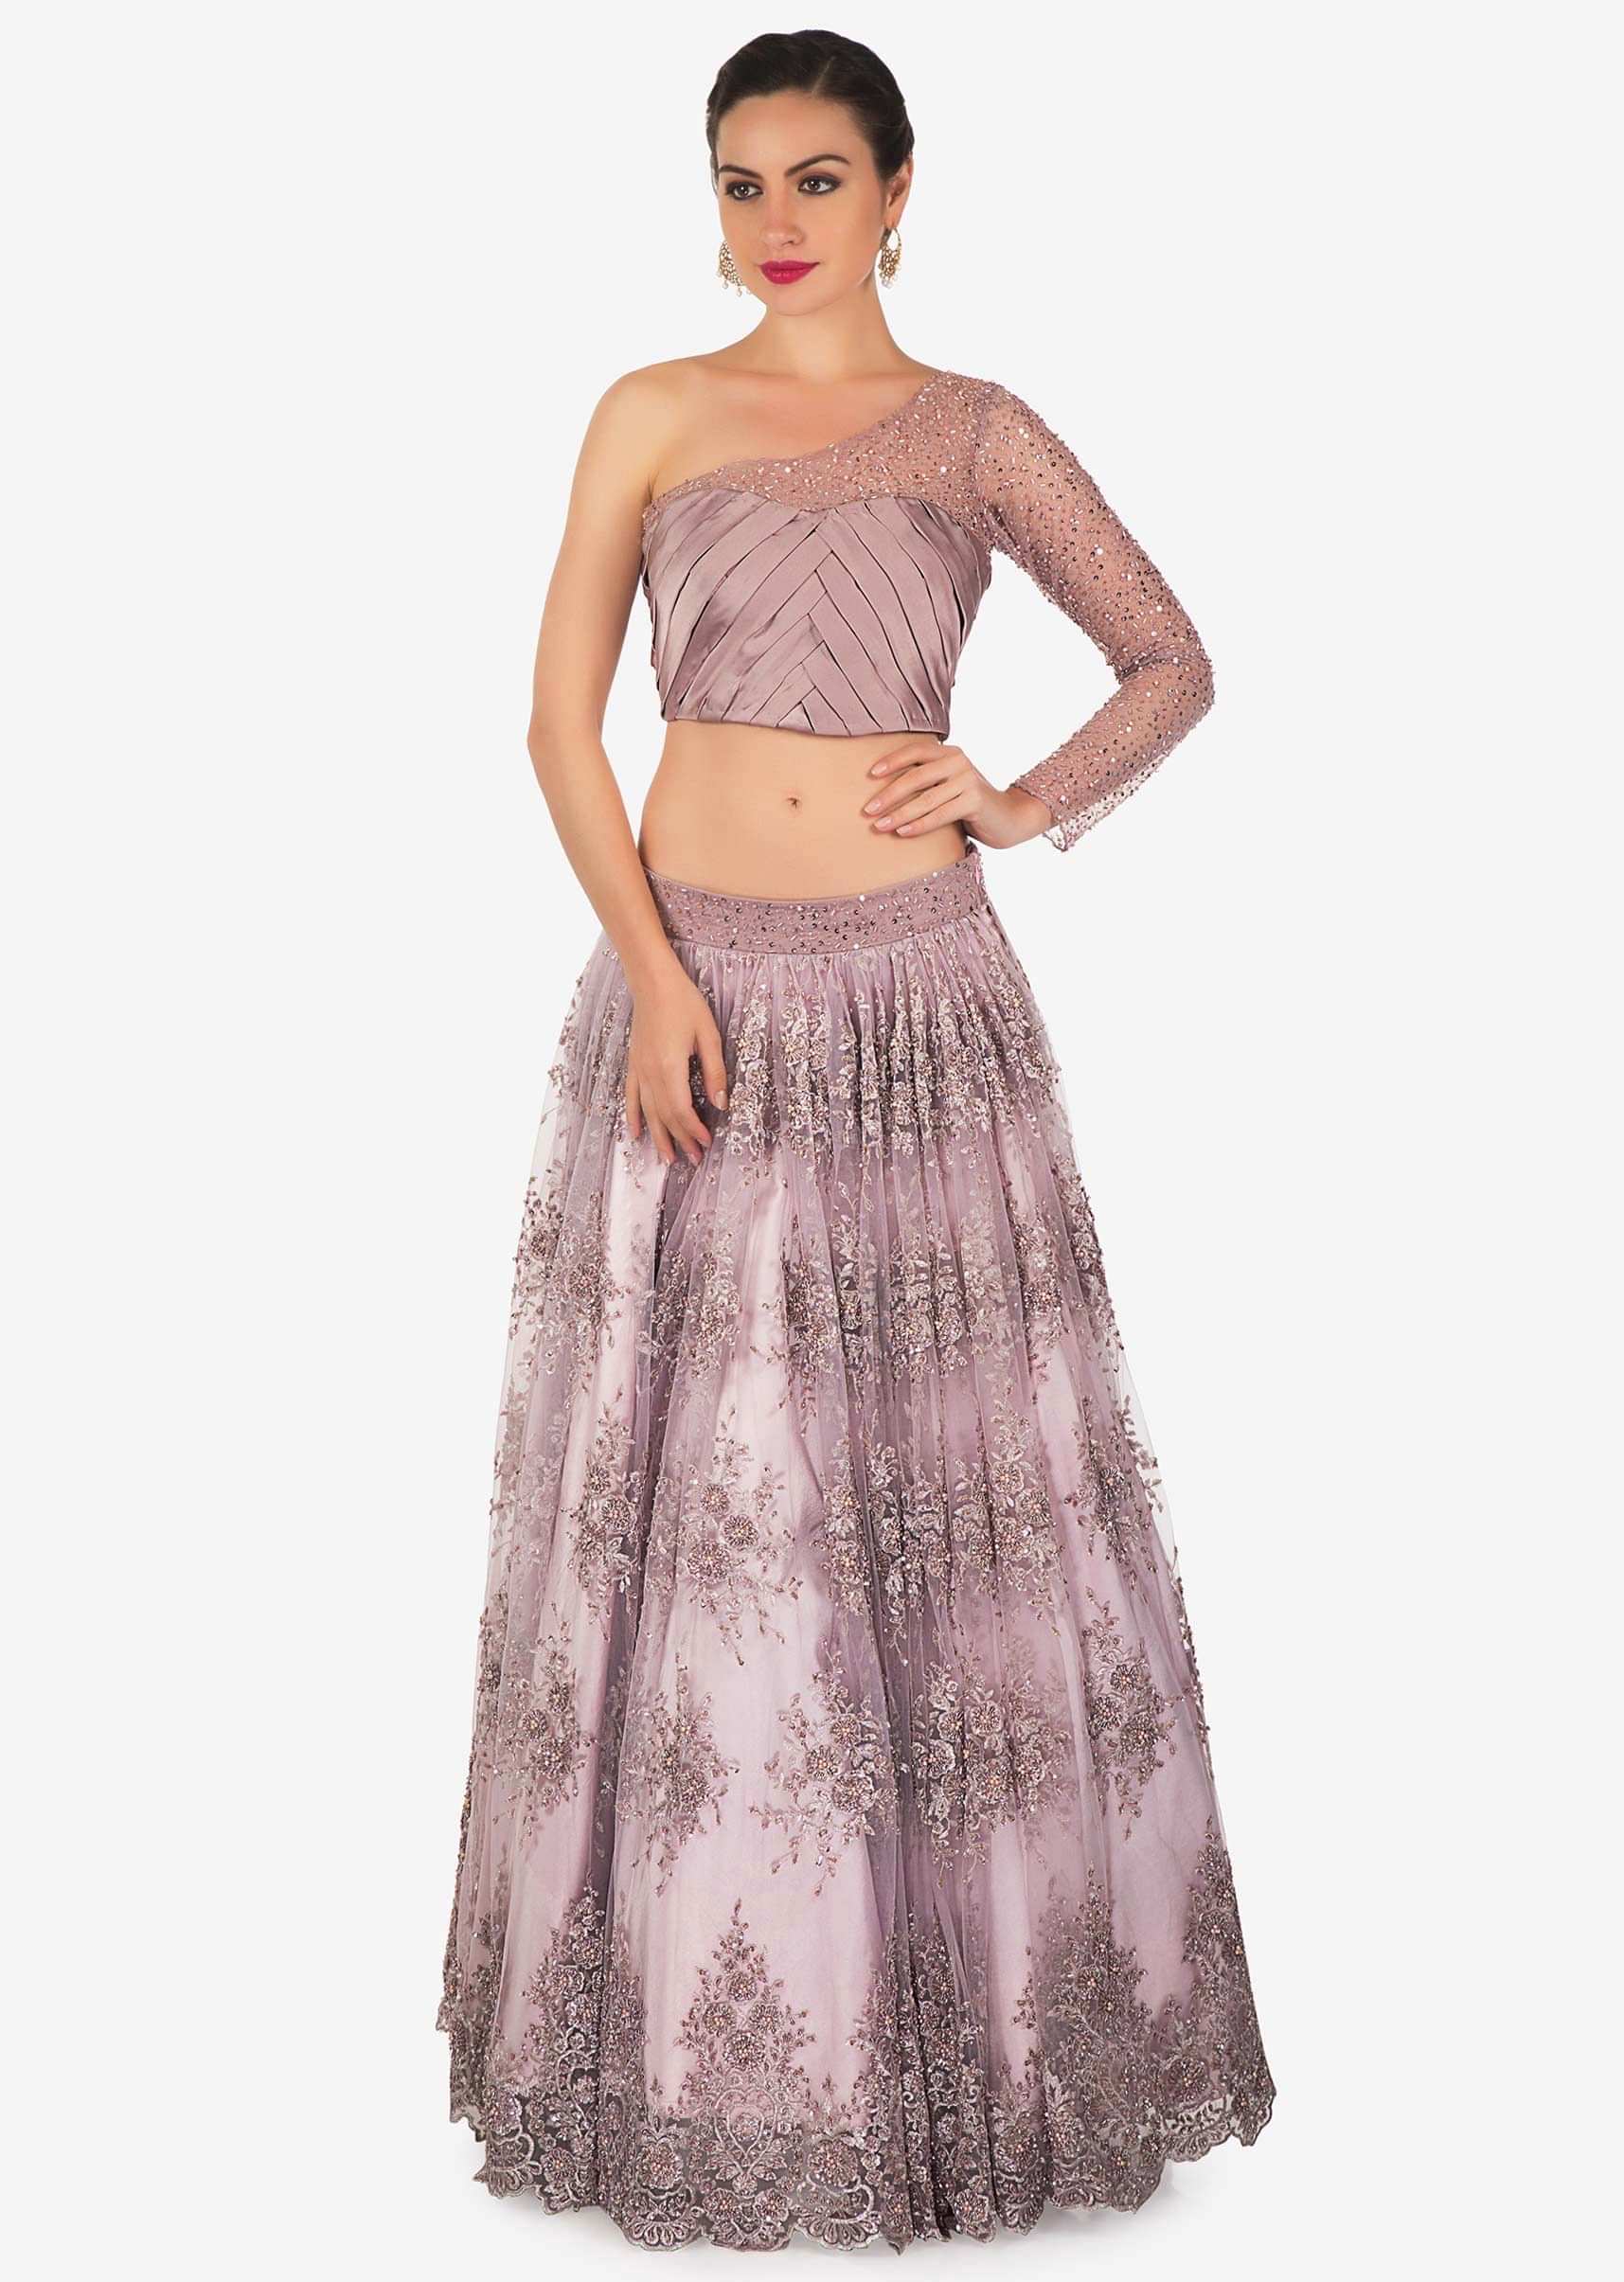 Mauve Satin and Net Lehenga Blouse Set Featuring Embroidered Net Only on Kalki